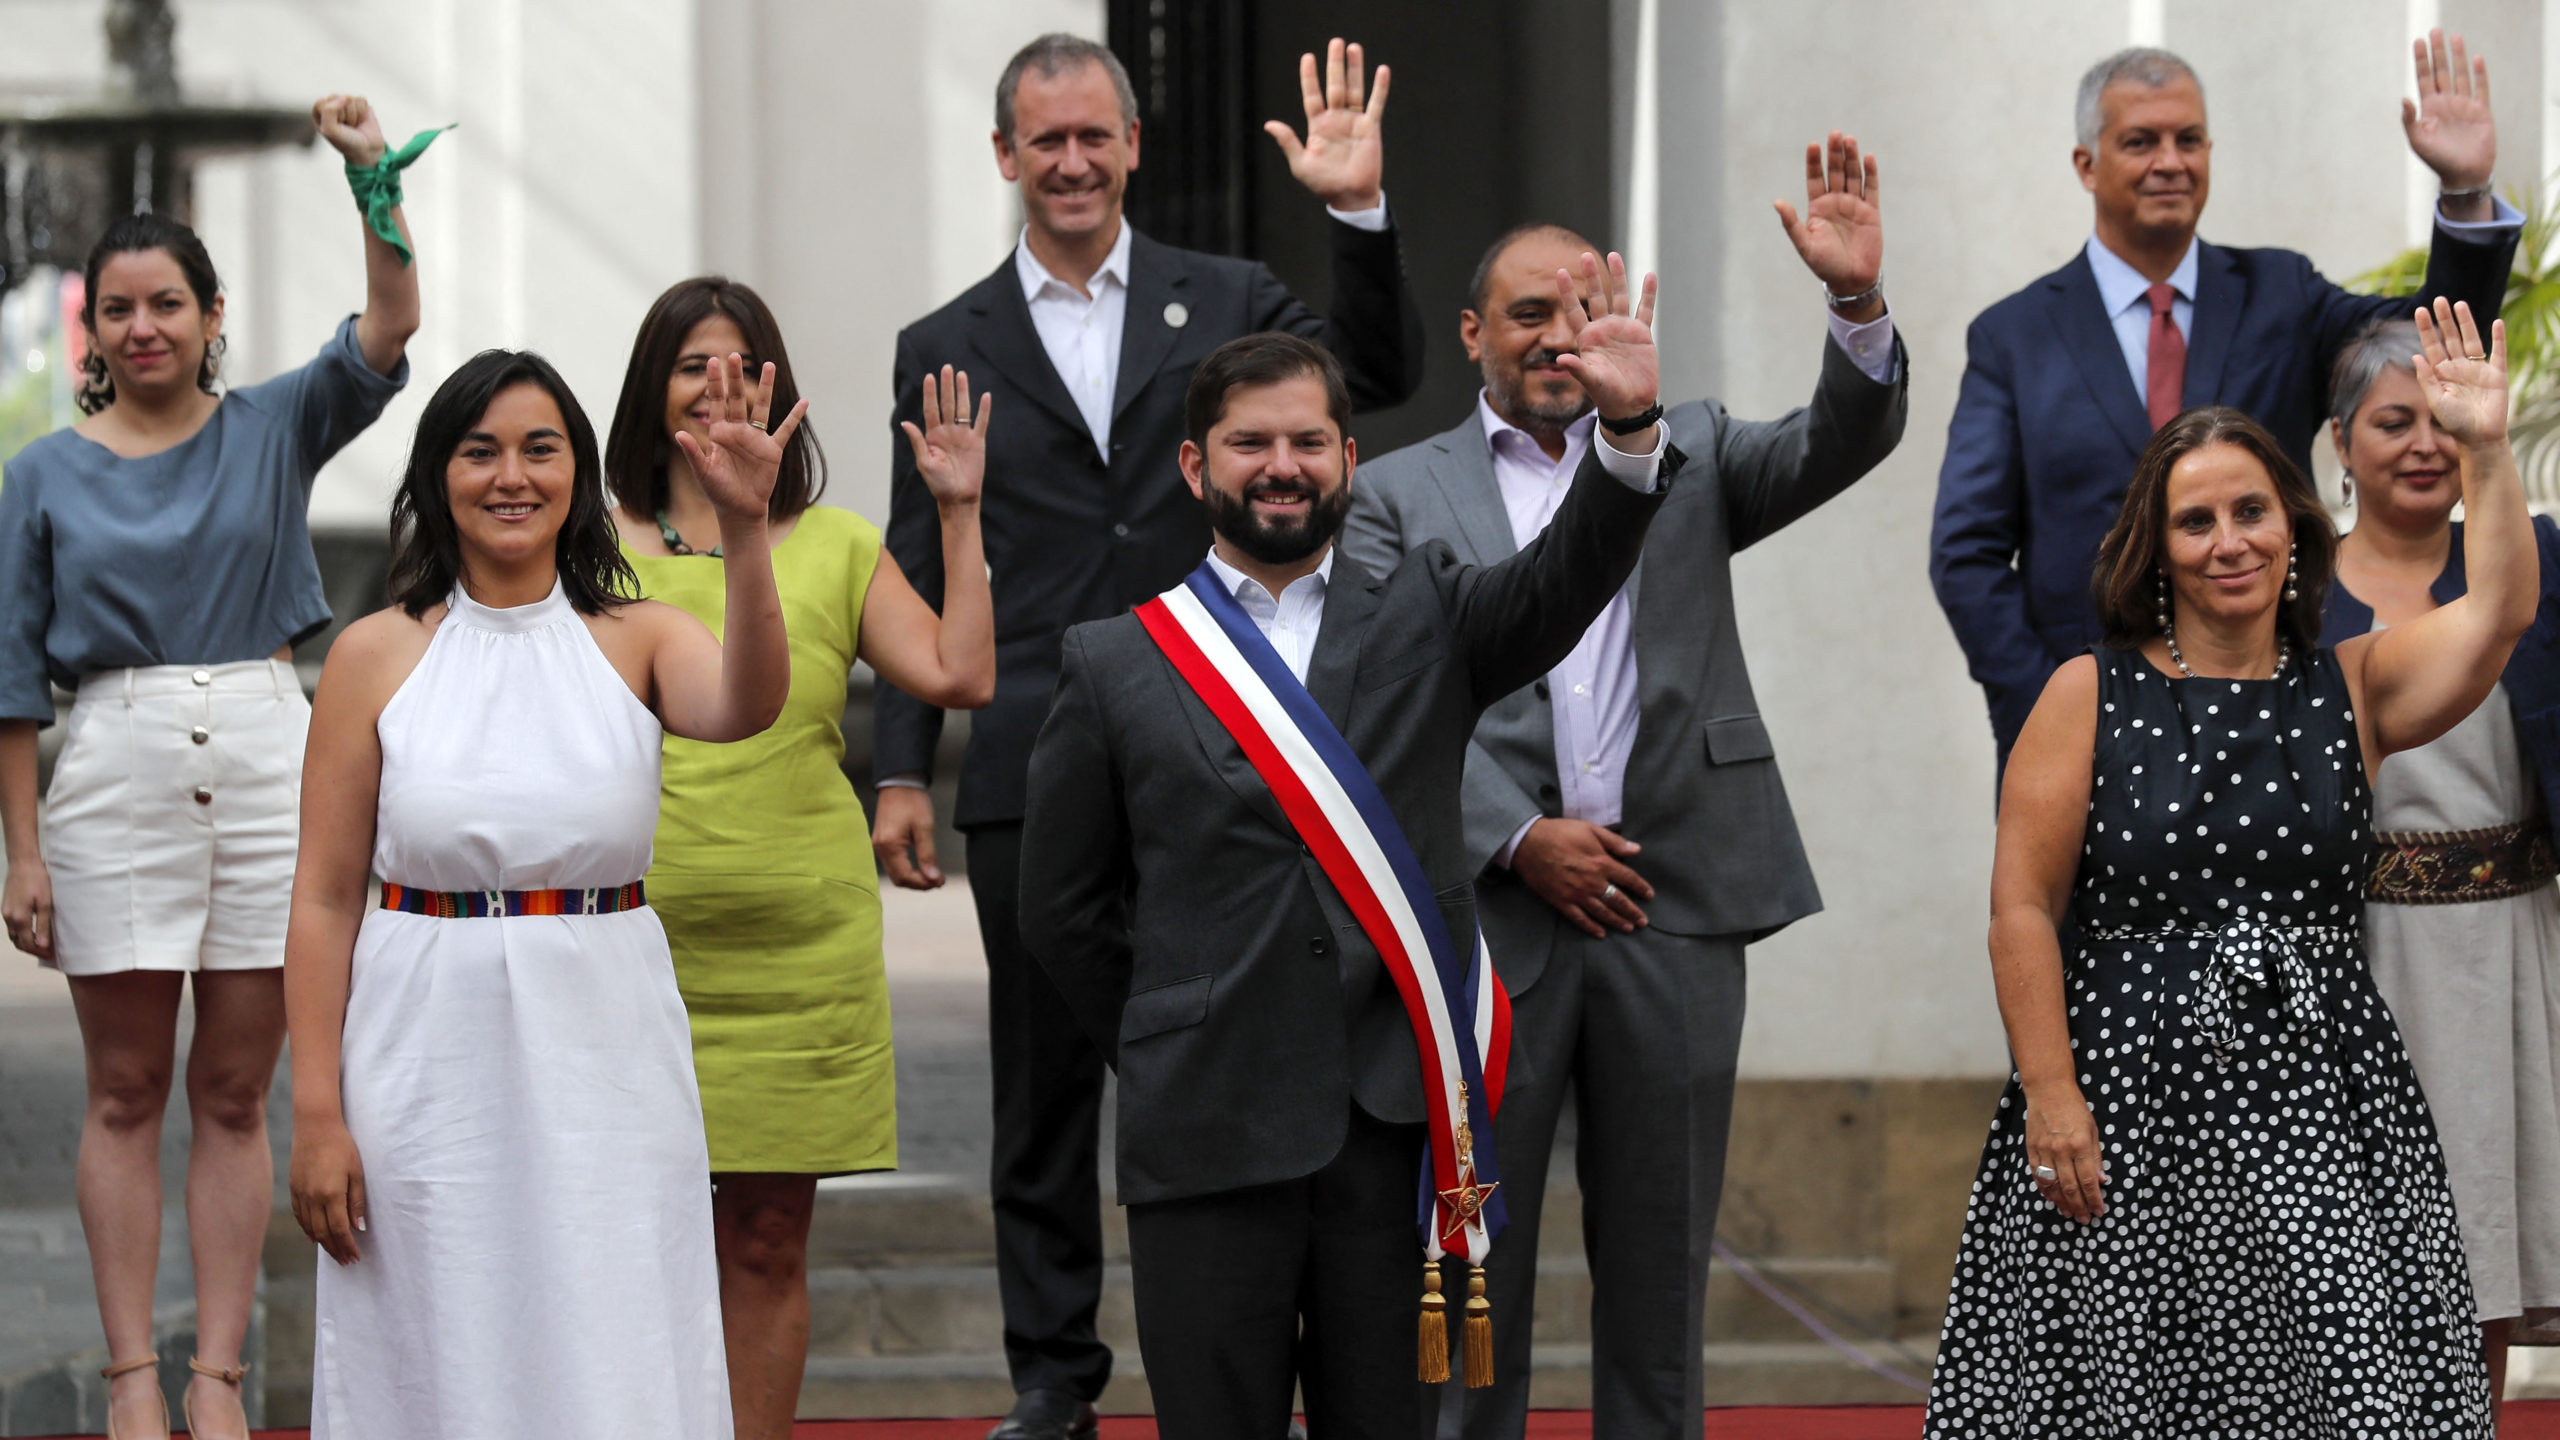 Chilean President Gabriel Boric (C) poses with his state ministers for a family picture at La Moneda presidential palace in Santiago, on March 12, 2022. – Leftist ex-student activist Gabriel Boric was sworn in Friday as Chile’s youngest-ever president and hailed the country’s Marxist former leader Salvador Allende in his inaugural address to the nation. (Photo by JAVIER TORRES / AFP)